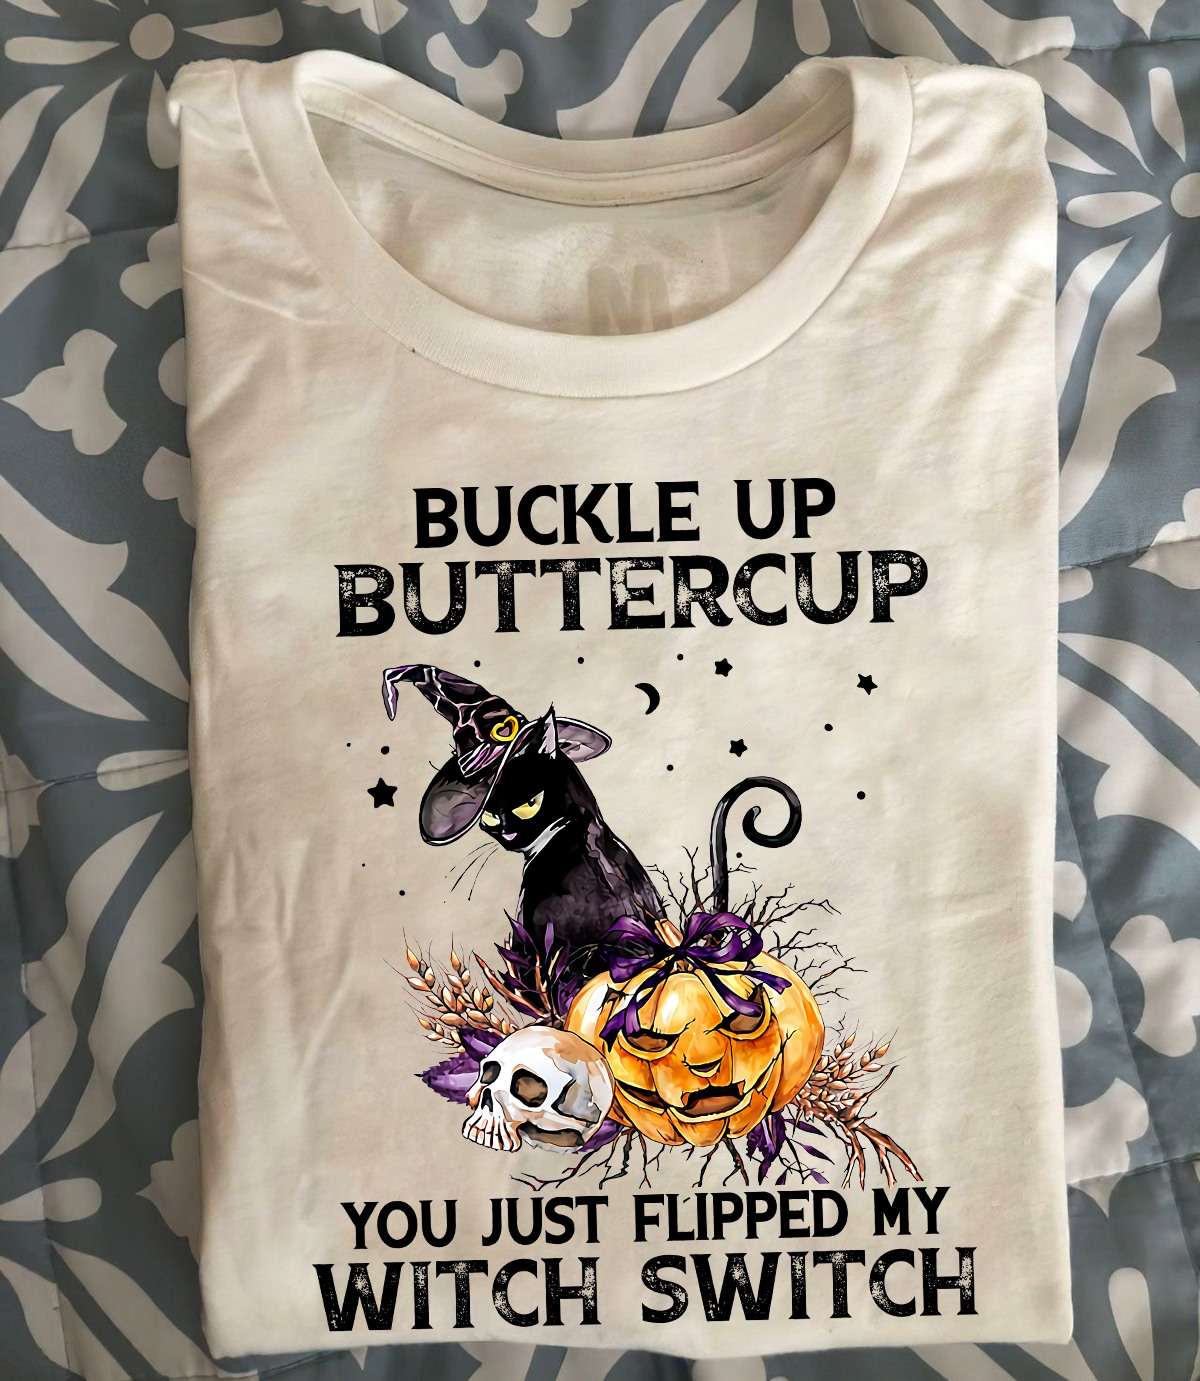 Buckle up buttercup you just flipped my witch switch - Black cat witch, Halloween devil pumpkin